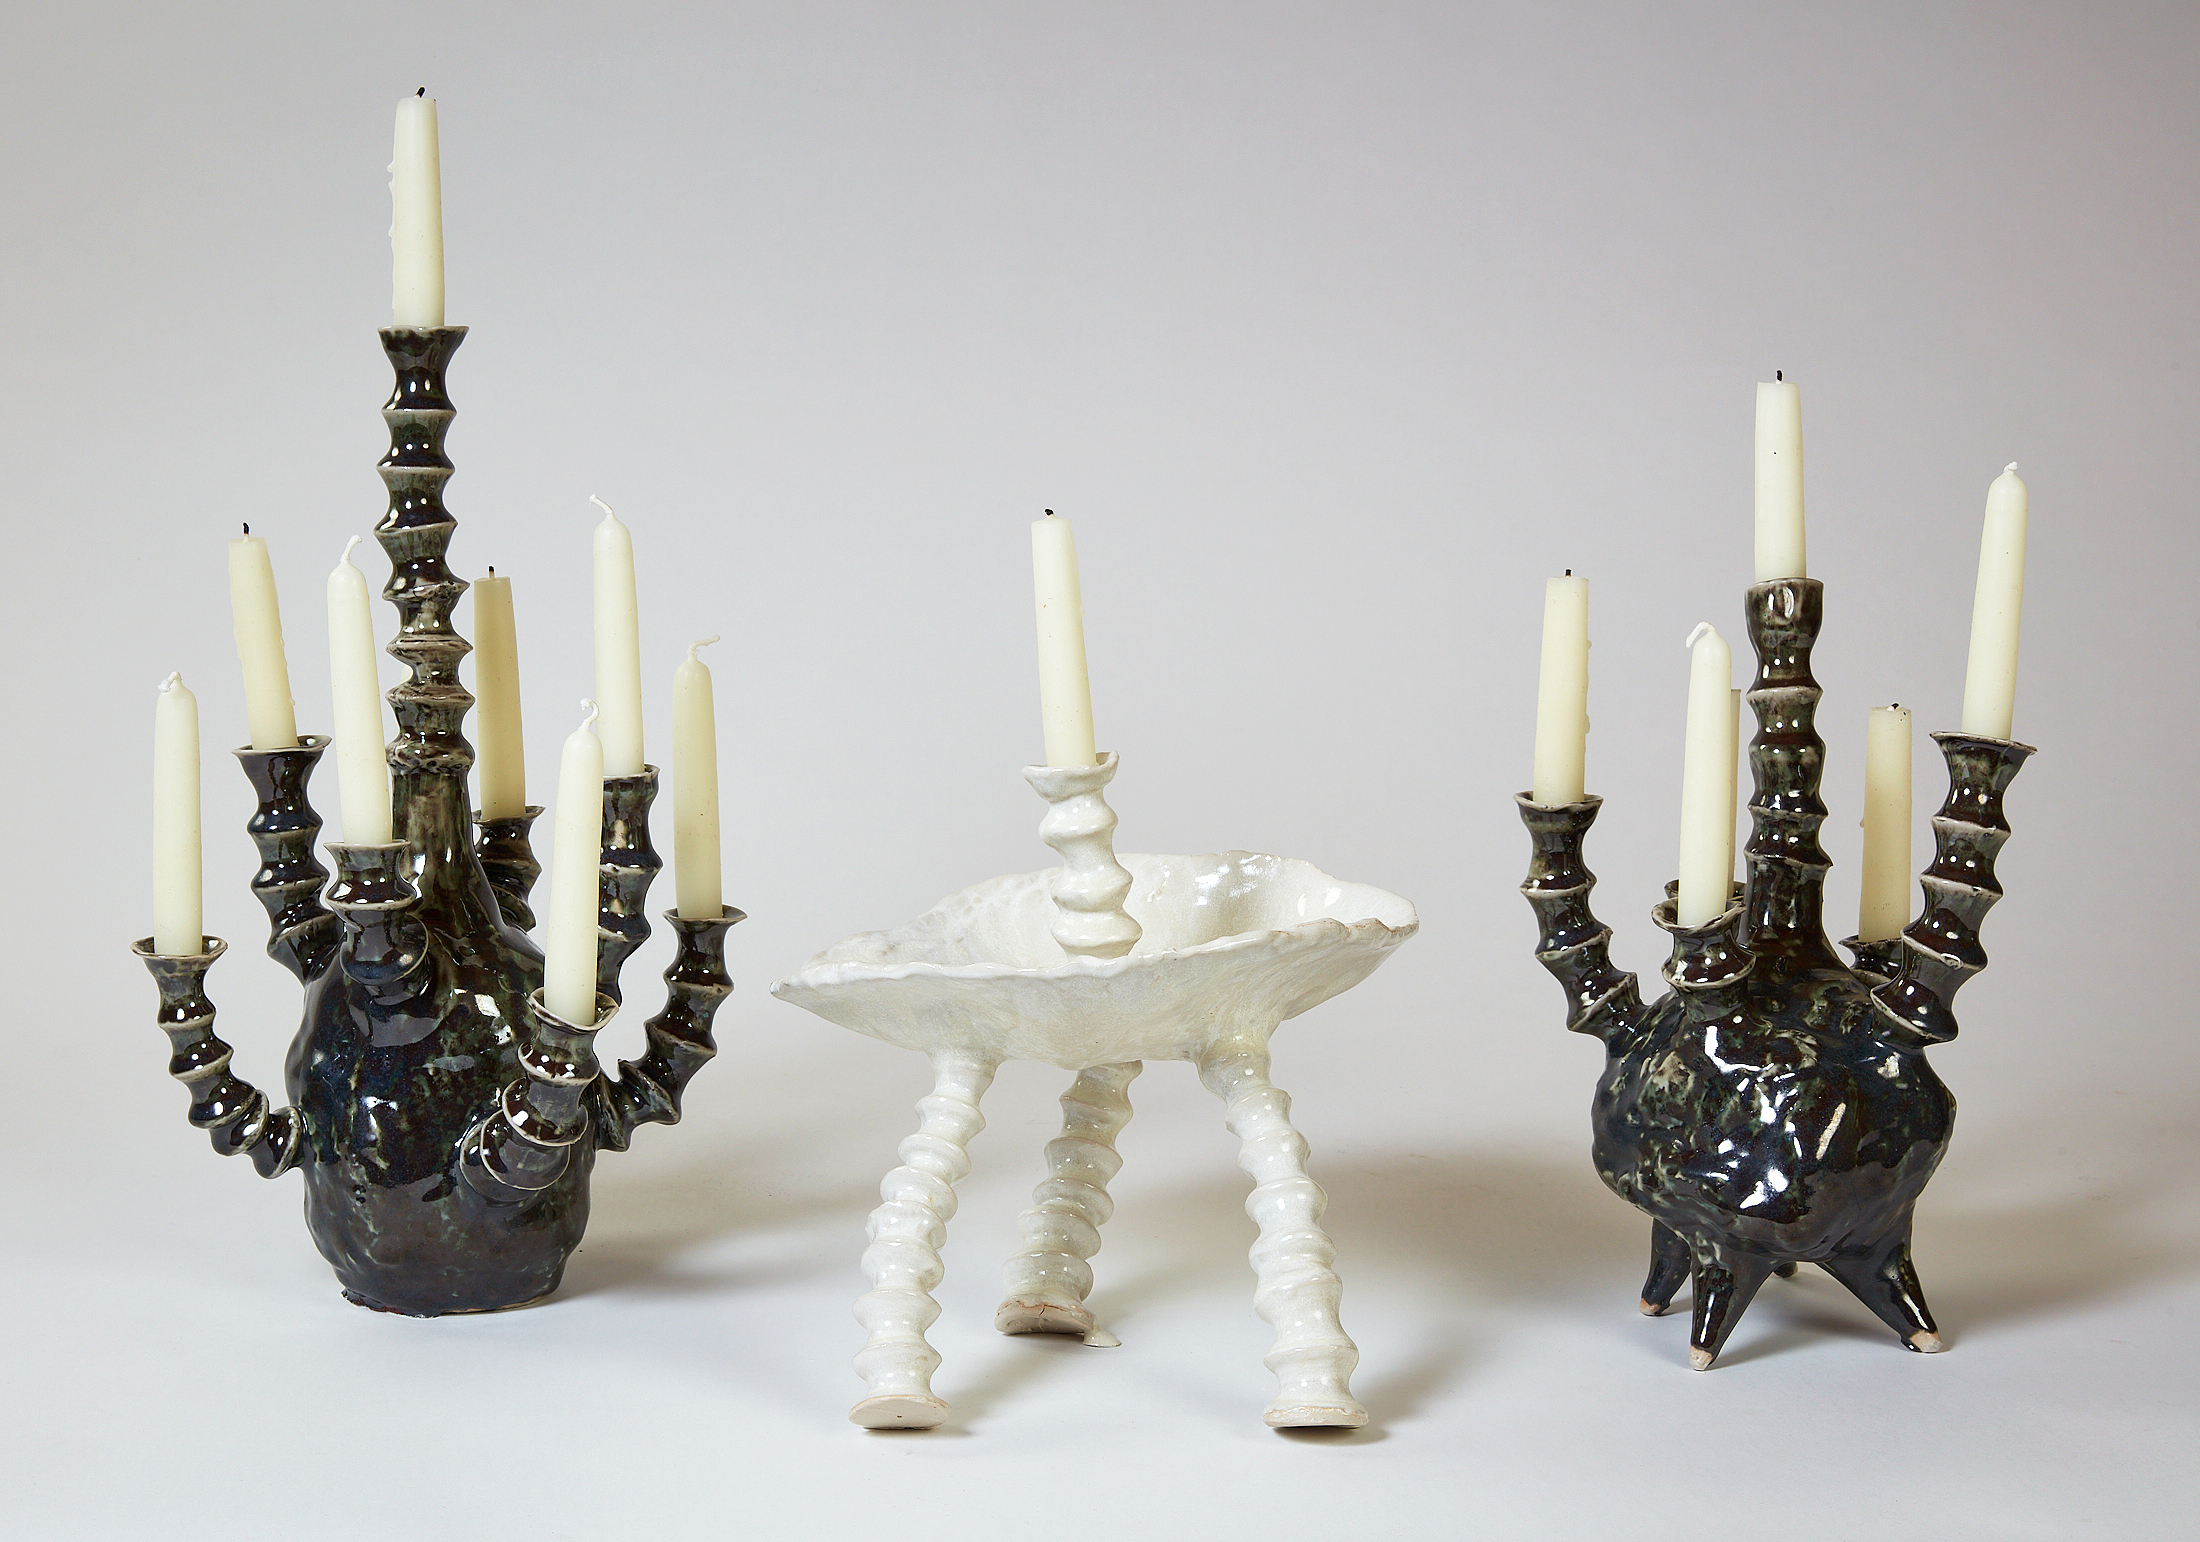 Baroque-styled candle sticks